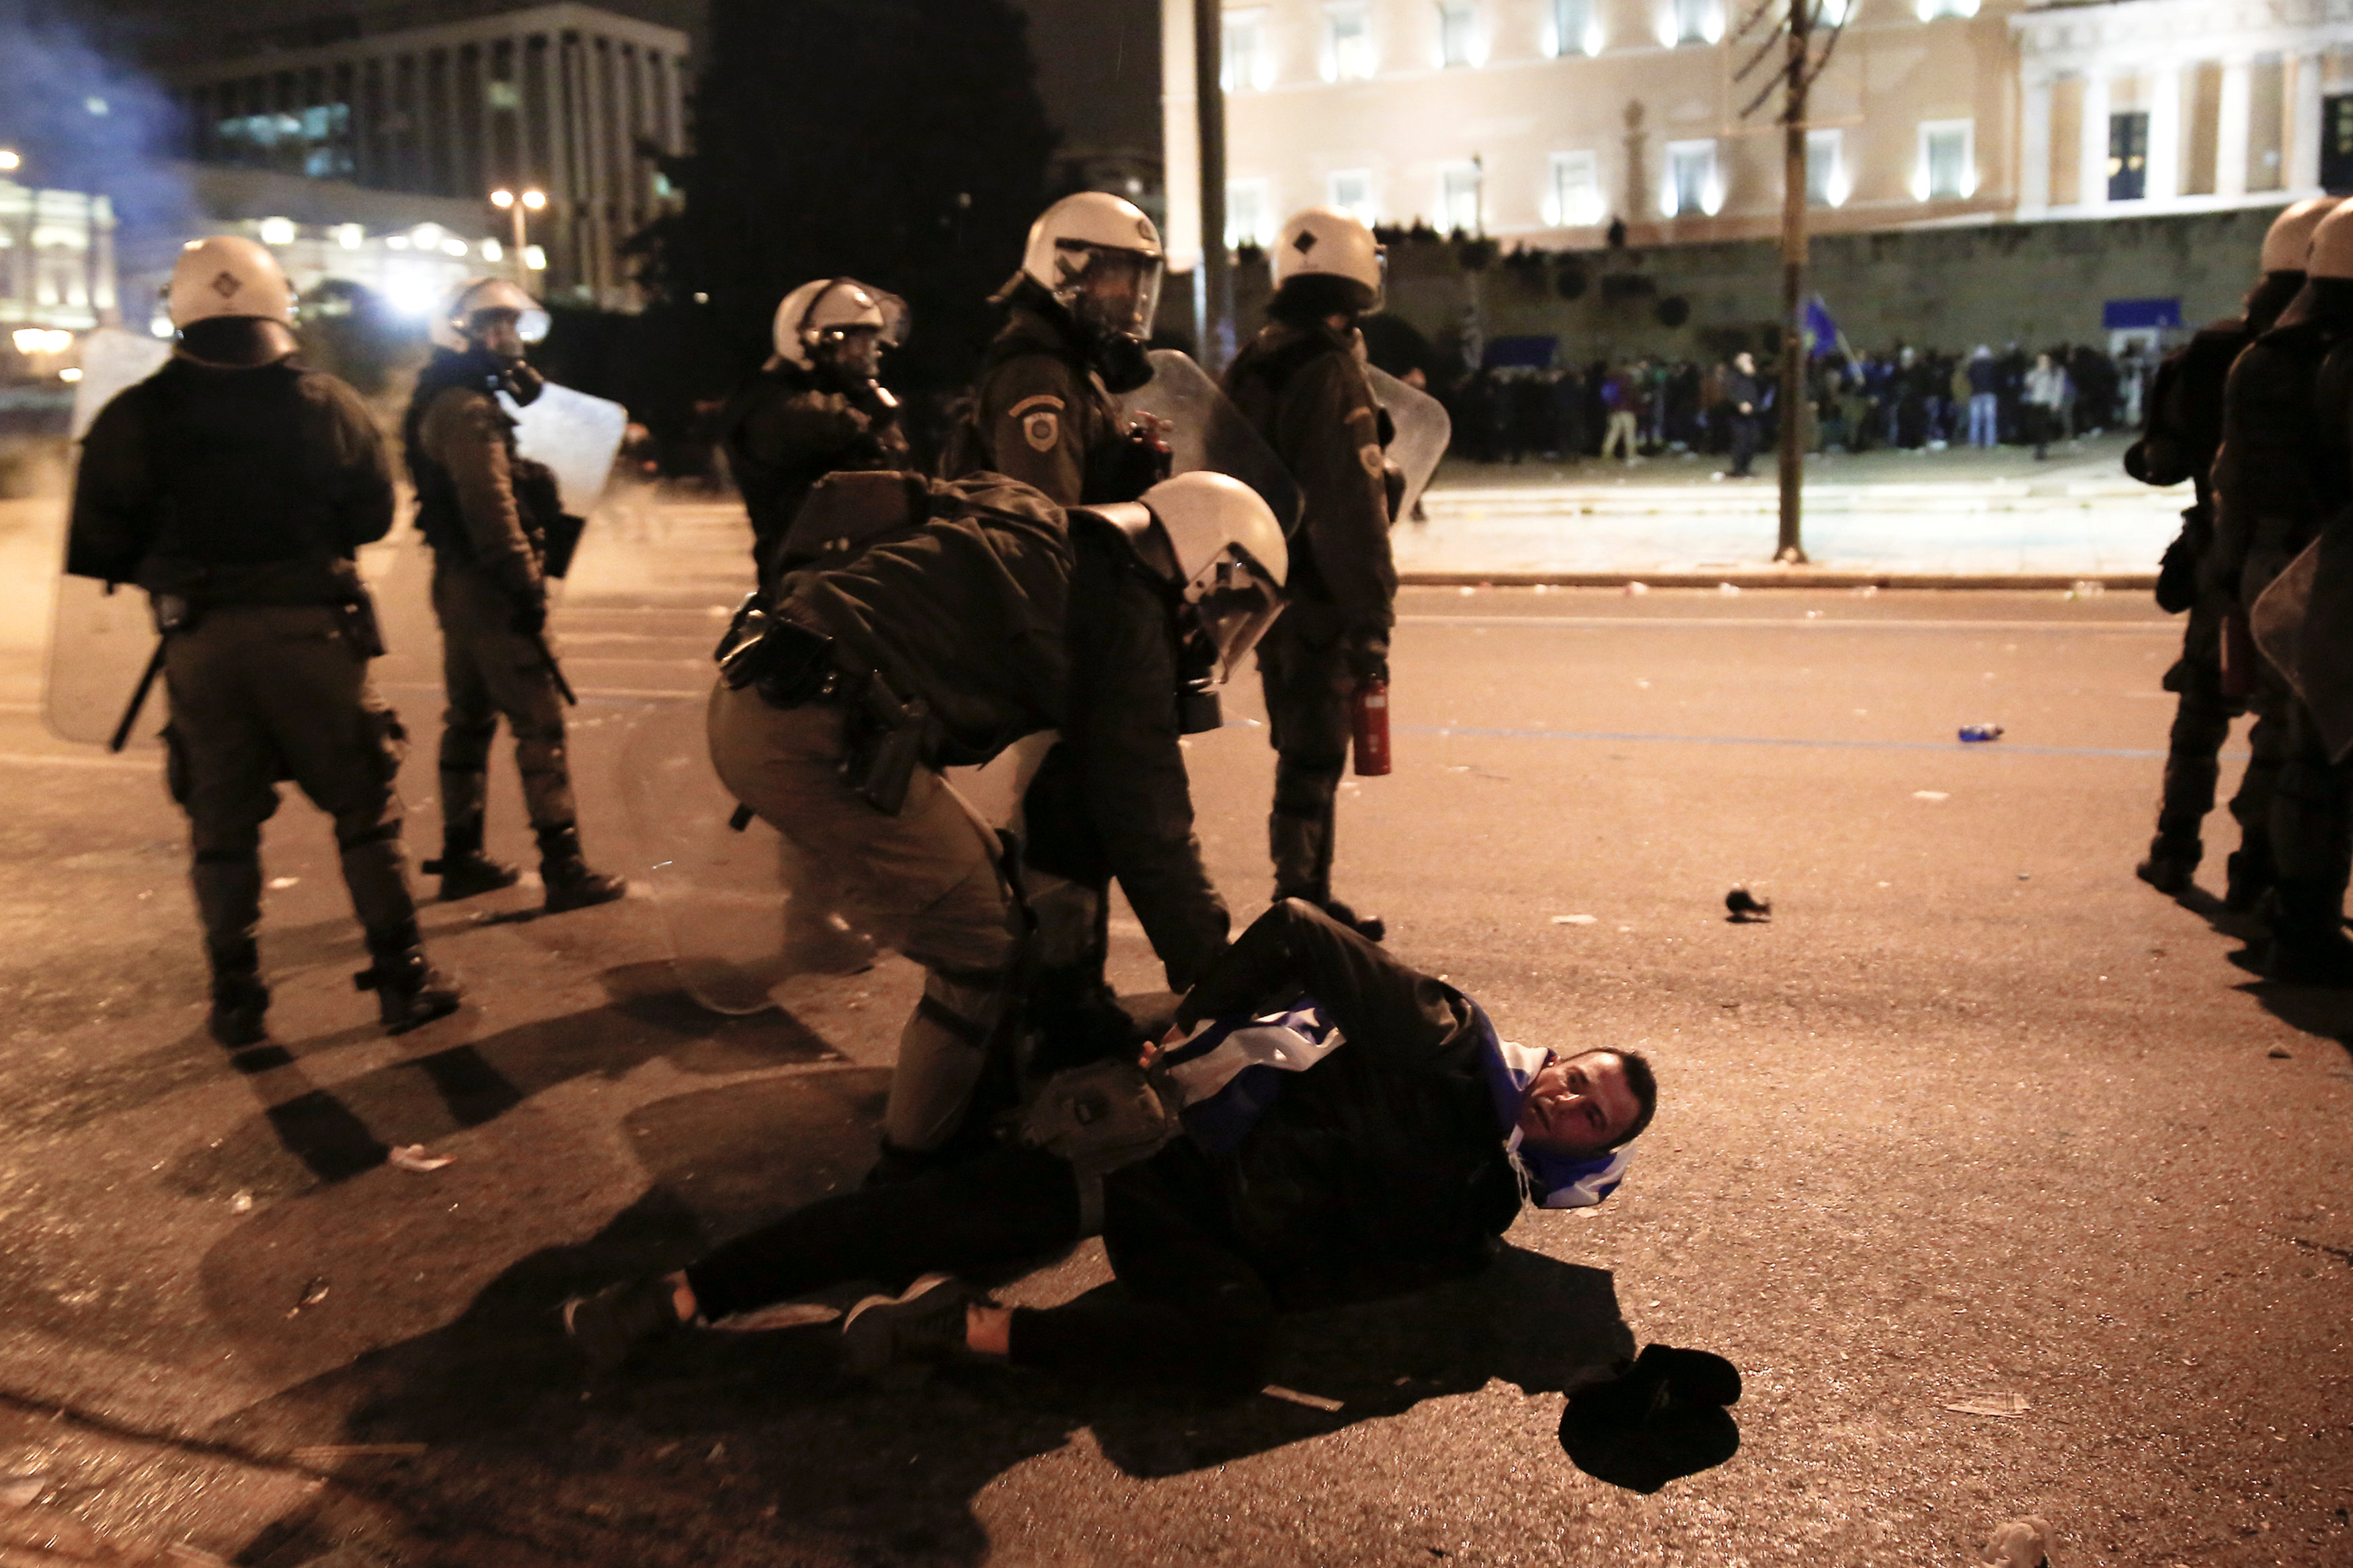 2019-01-24T222232Z_1619719255_RC151E7D8530_RTRMADP_3_GREECE-MACEDONIA-PARLIAMENT-CLASHES